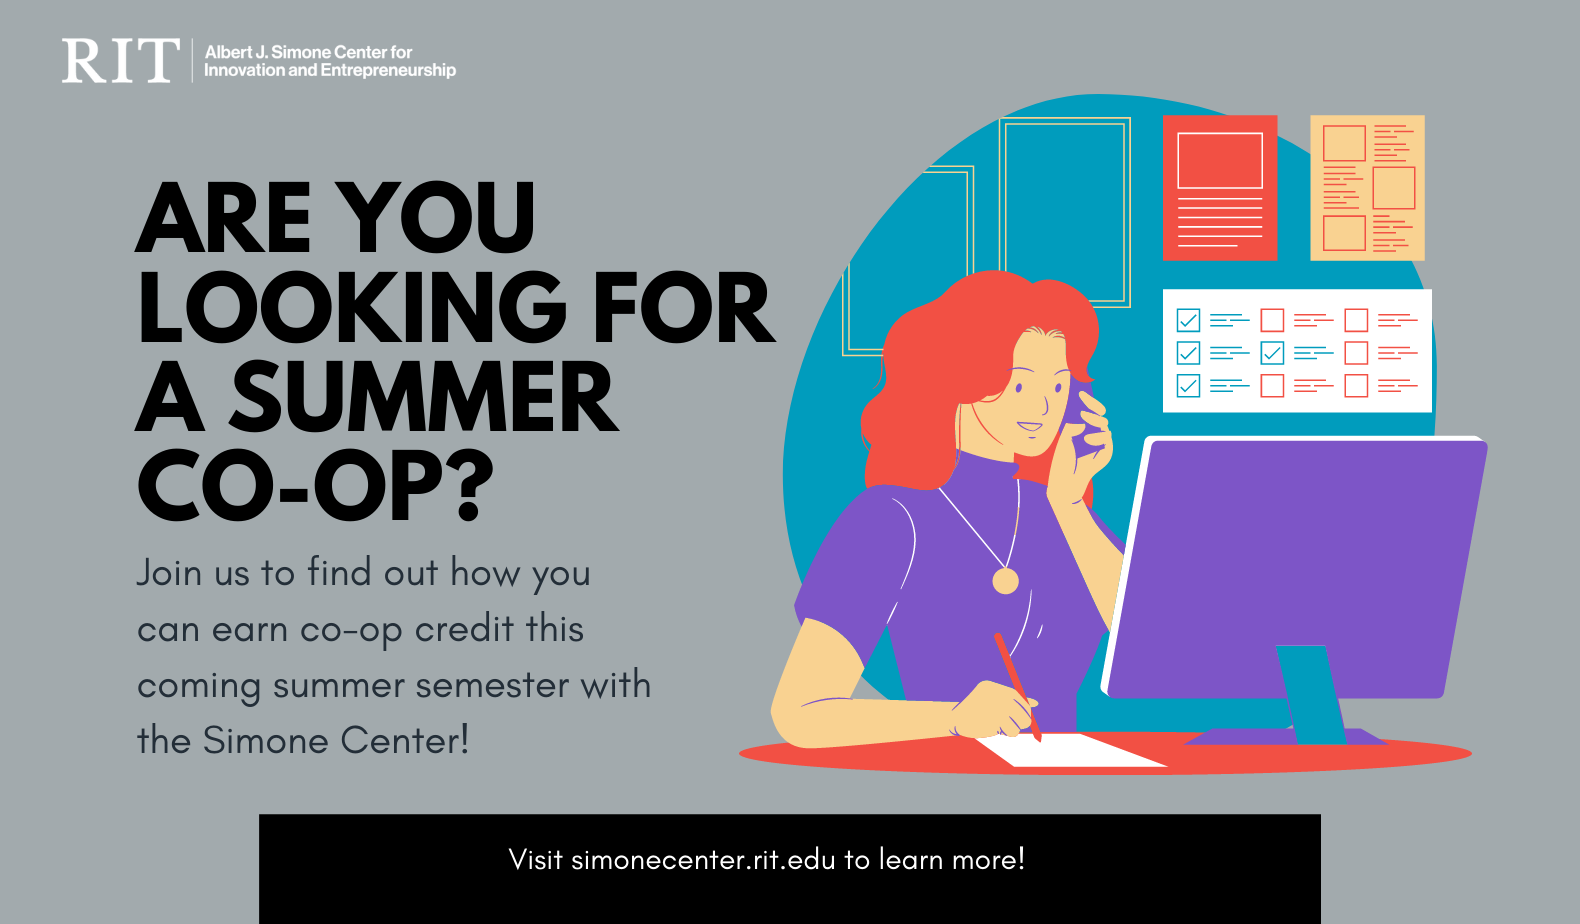 Are You Looking for a Summer Co-op?